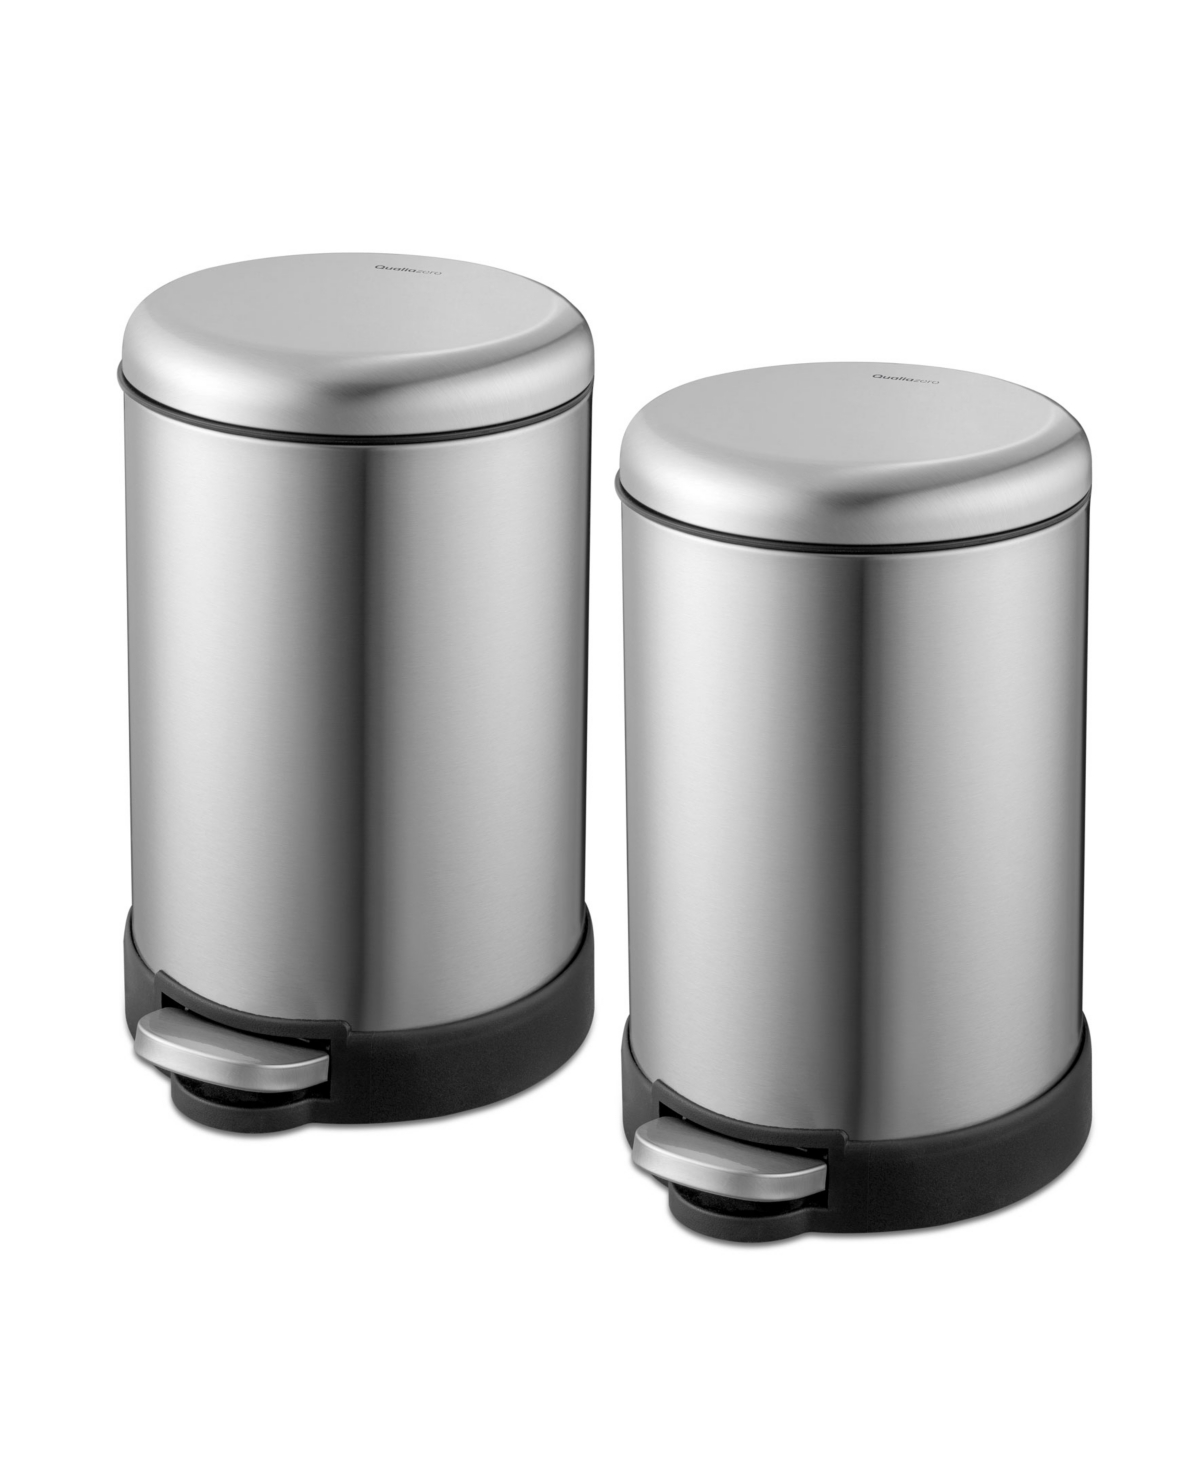 Qualiazero Two 1.6 Gallon Round Step On Trash Can Set, 2 Pieces, Stainless Steel, Twin Pack In Silver